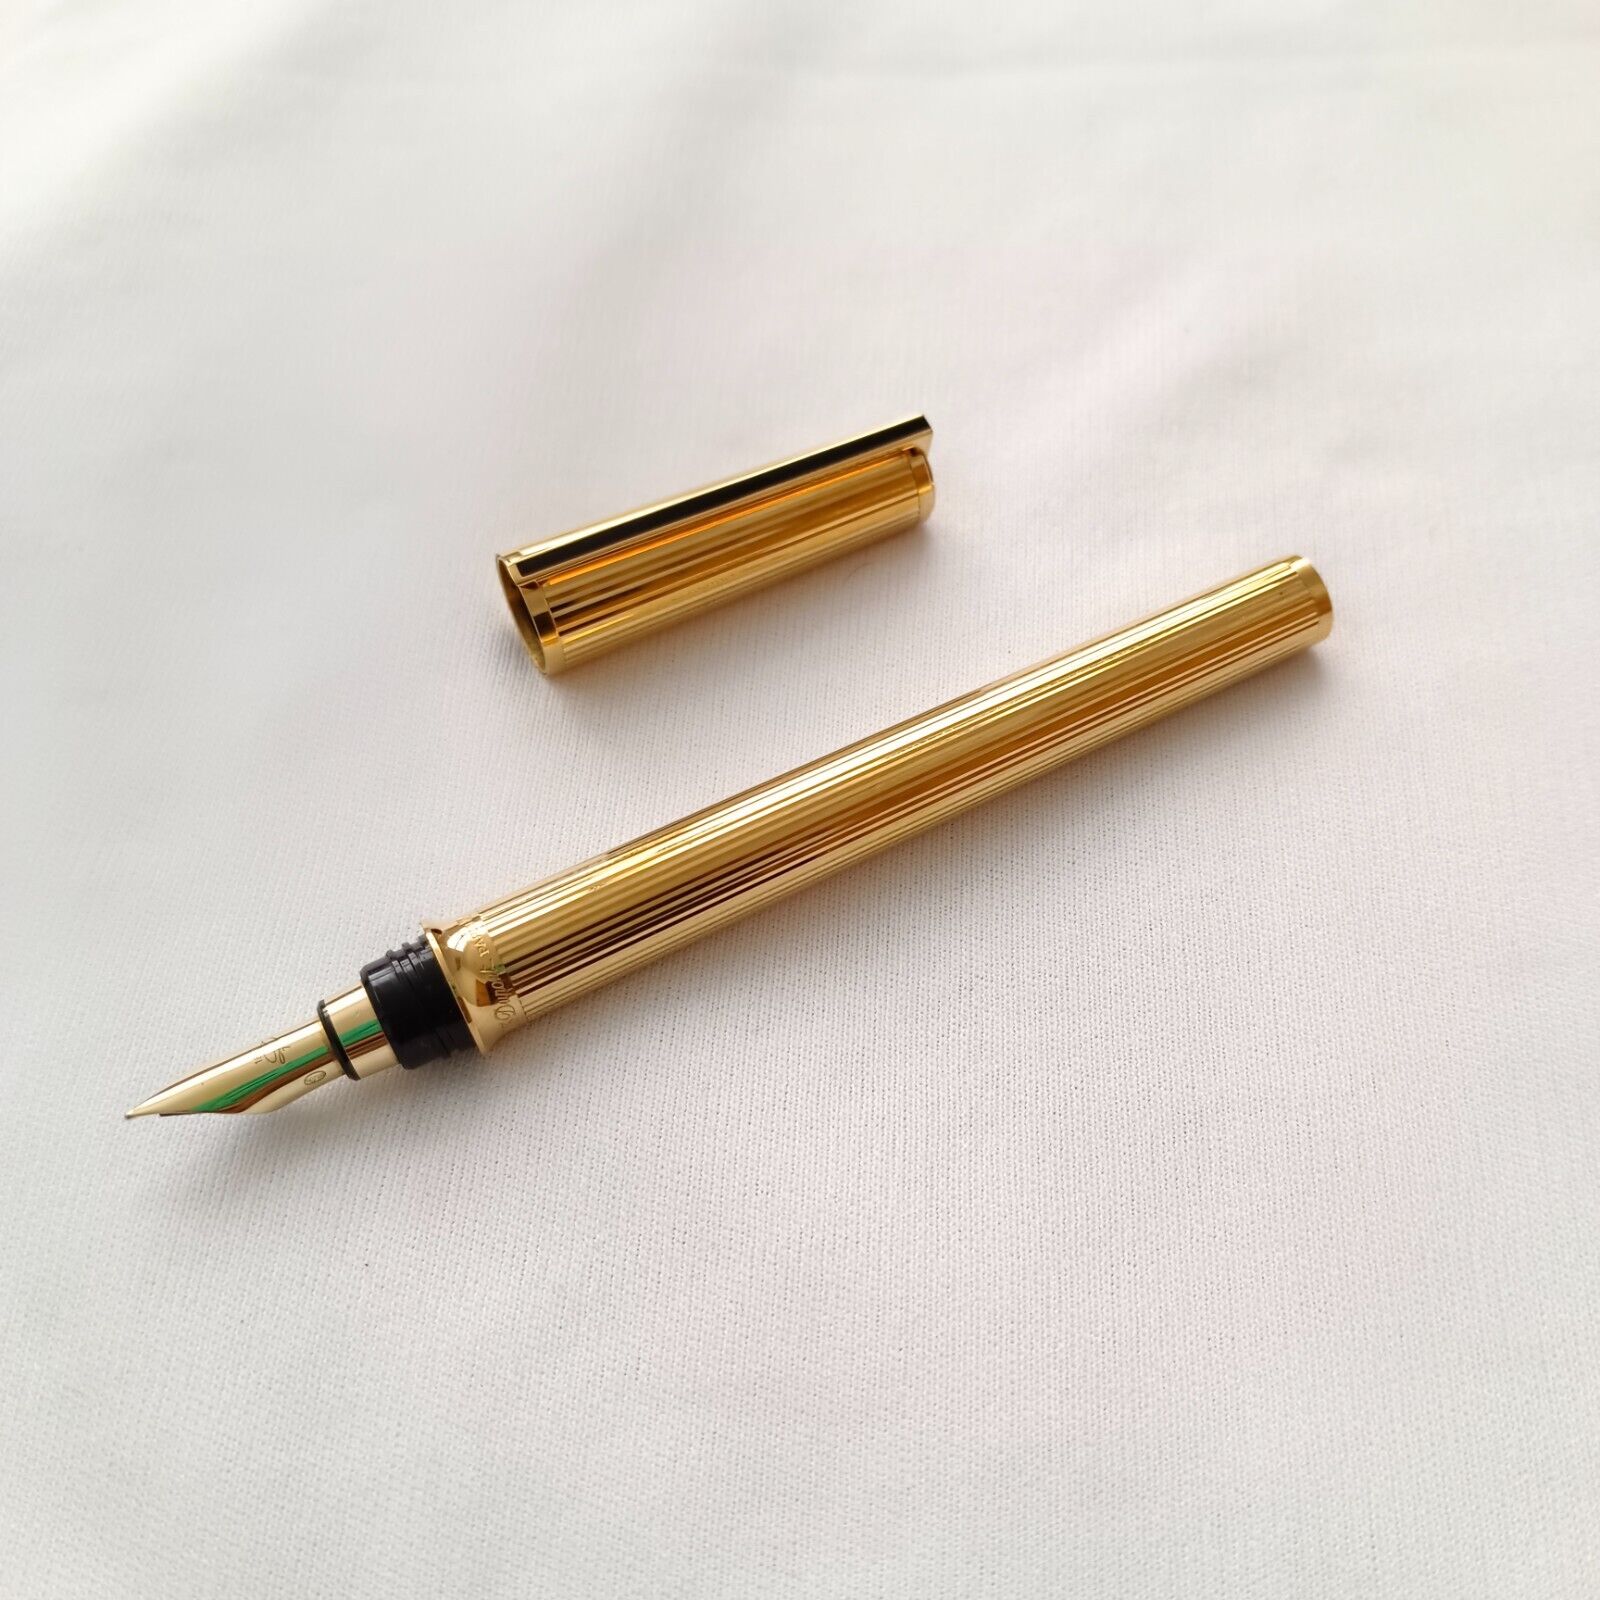 S.T. Dupont Montparnasse Gold Plated Guilloche Fountain Pen with 18kt Gold Nib